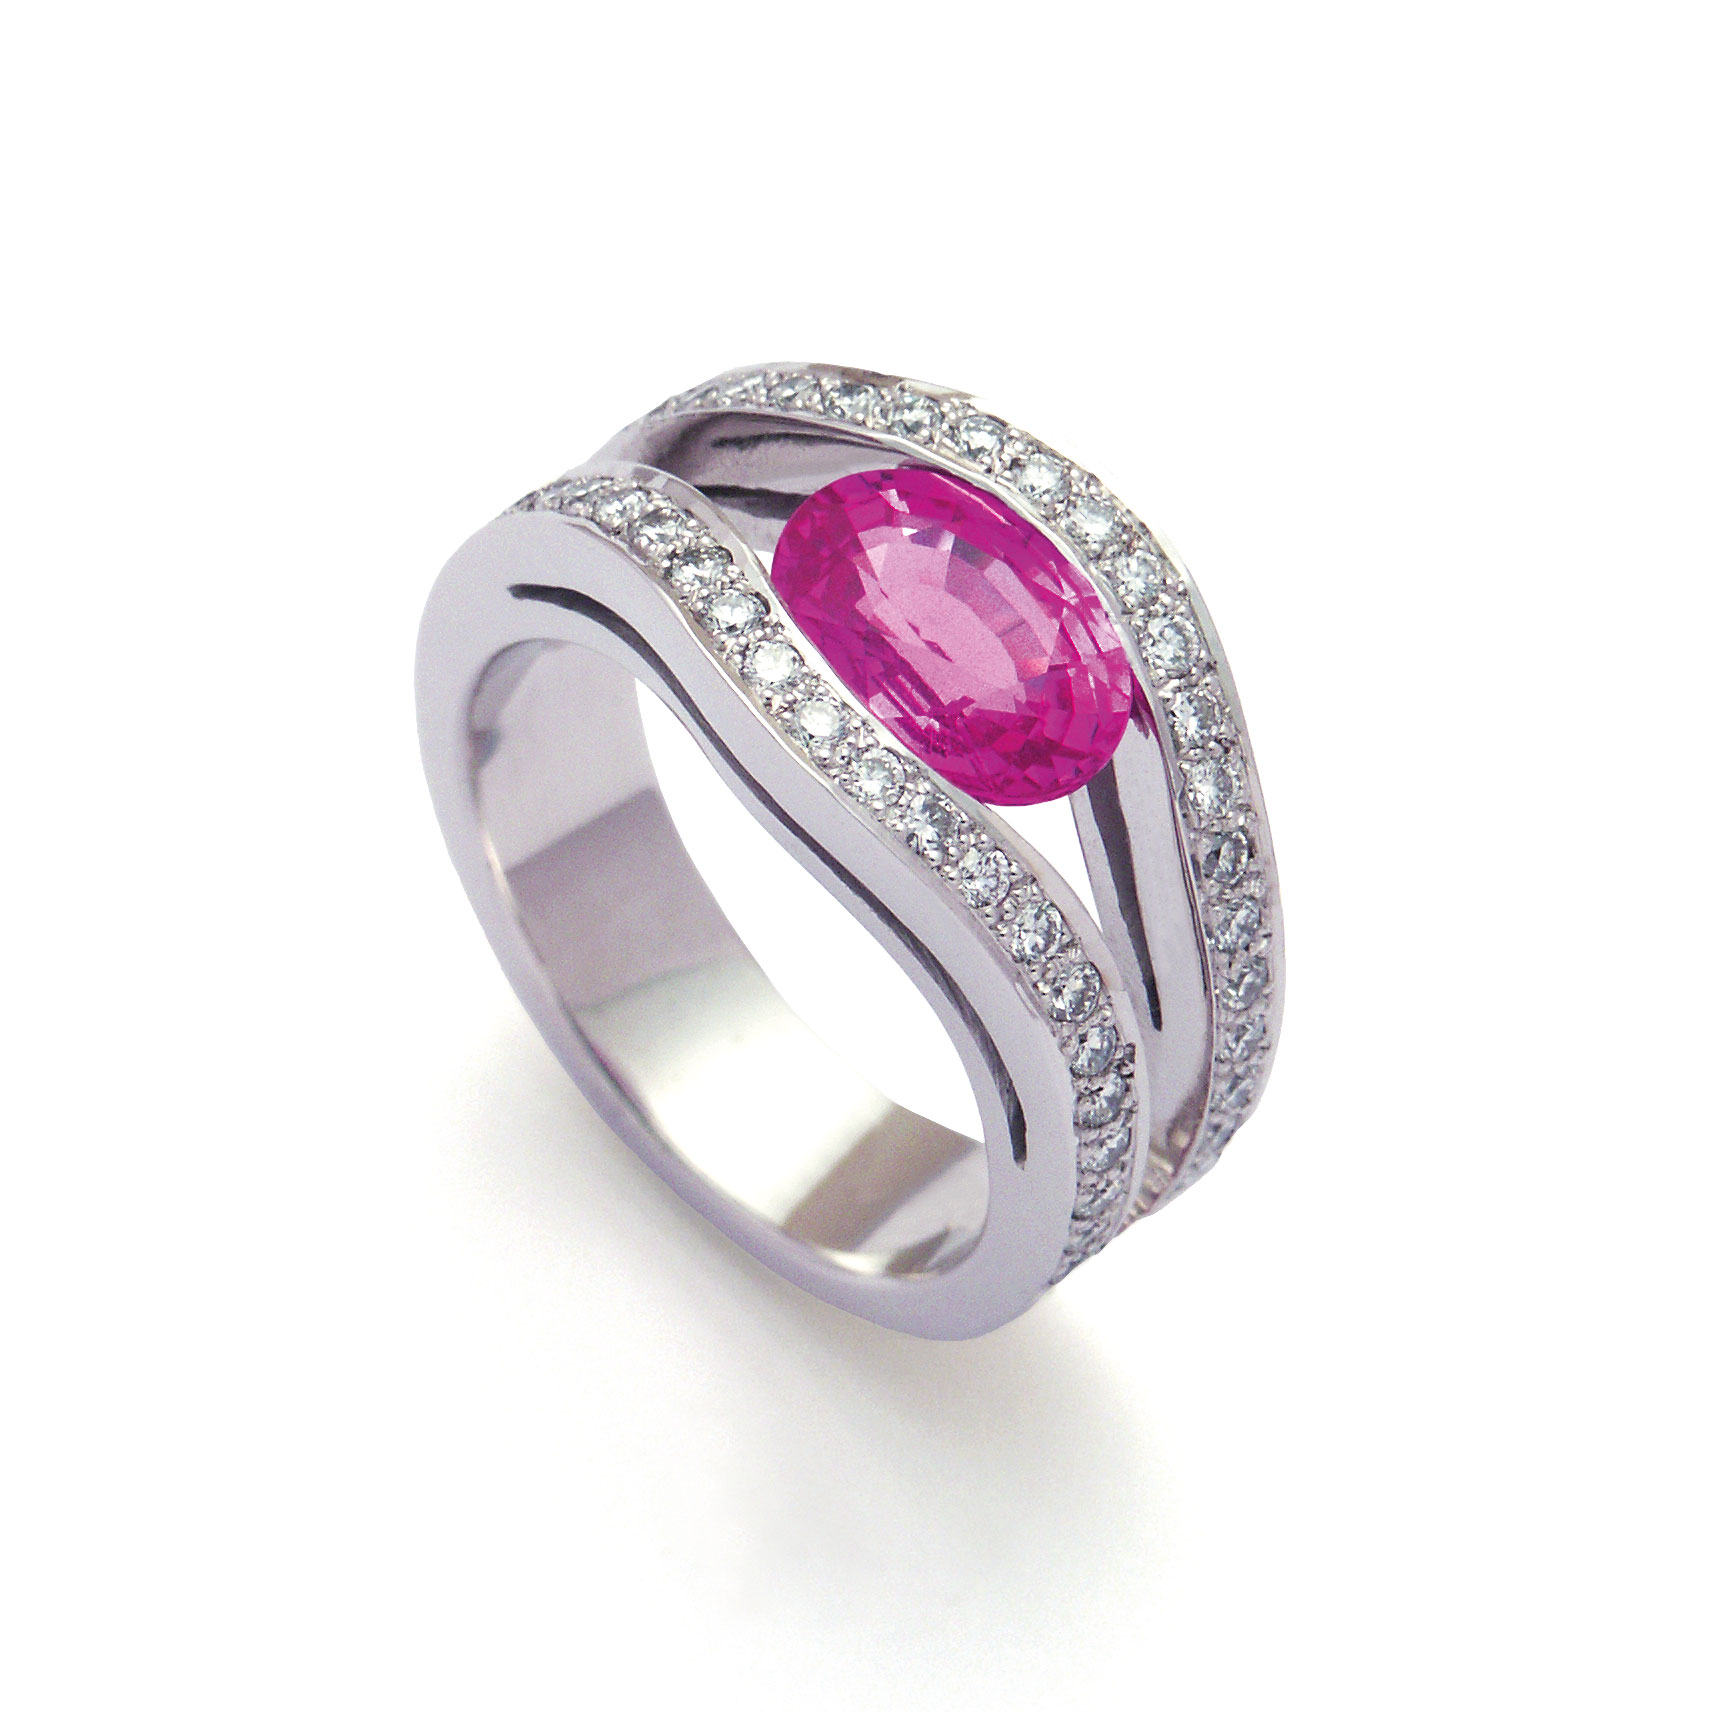 Oval pink sapphire ring